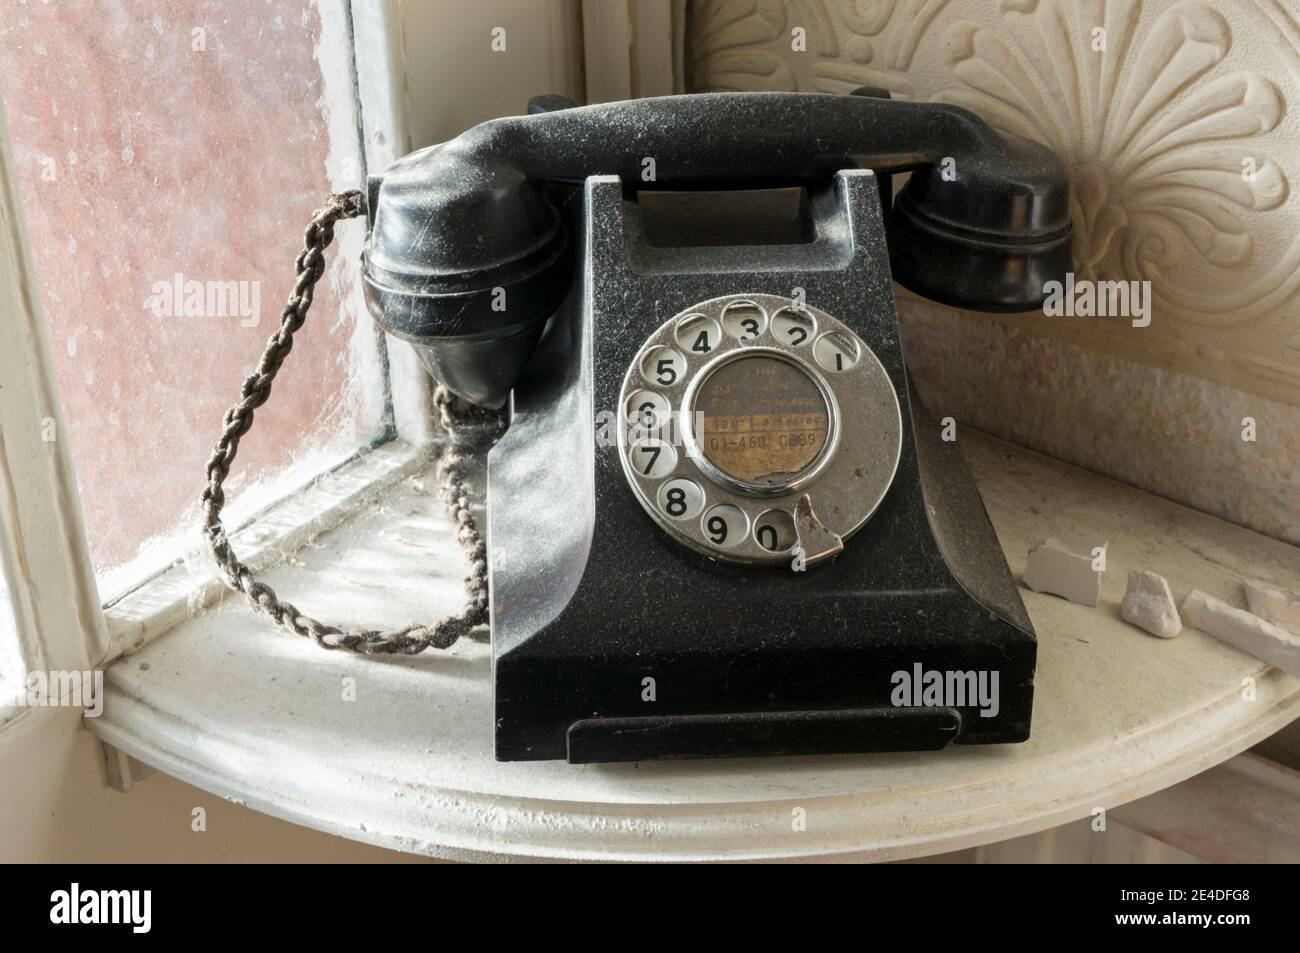 A dusty old-fashioned abandoned 'phone in an old house. Stock Photo